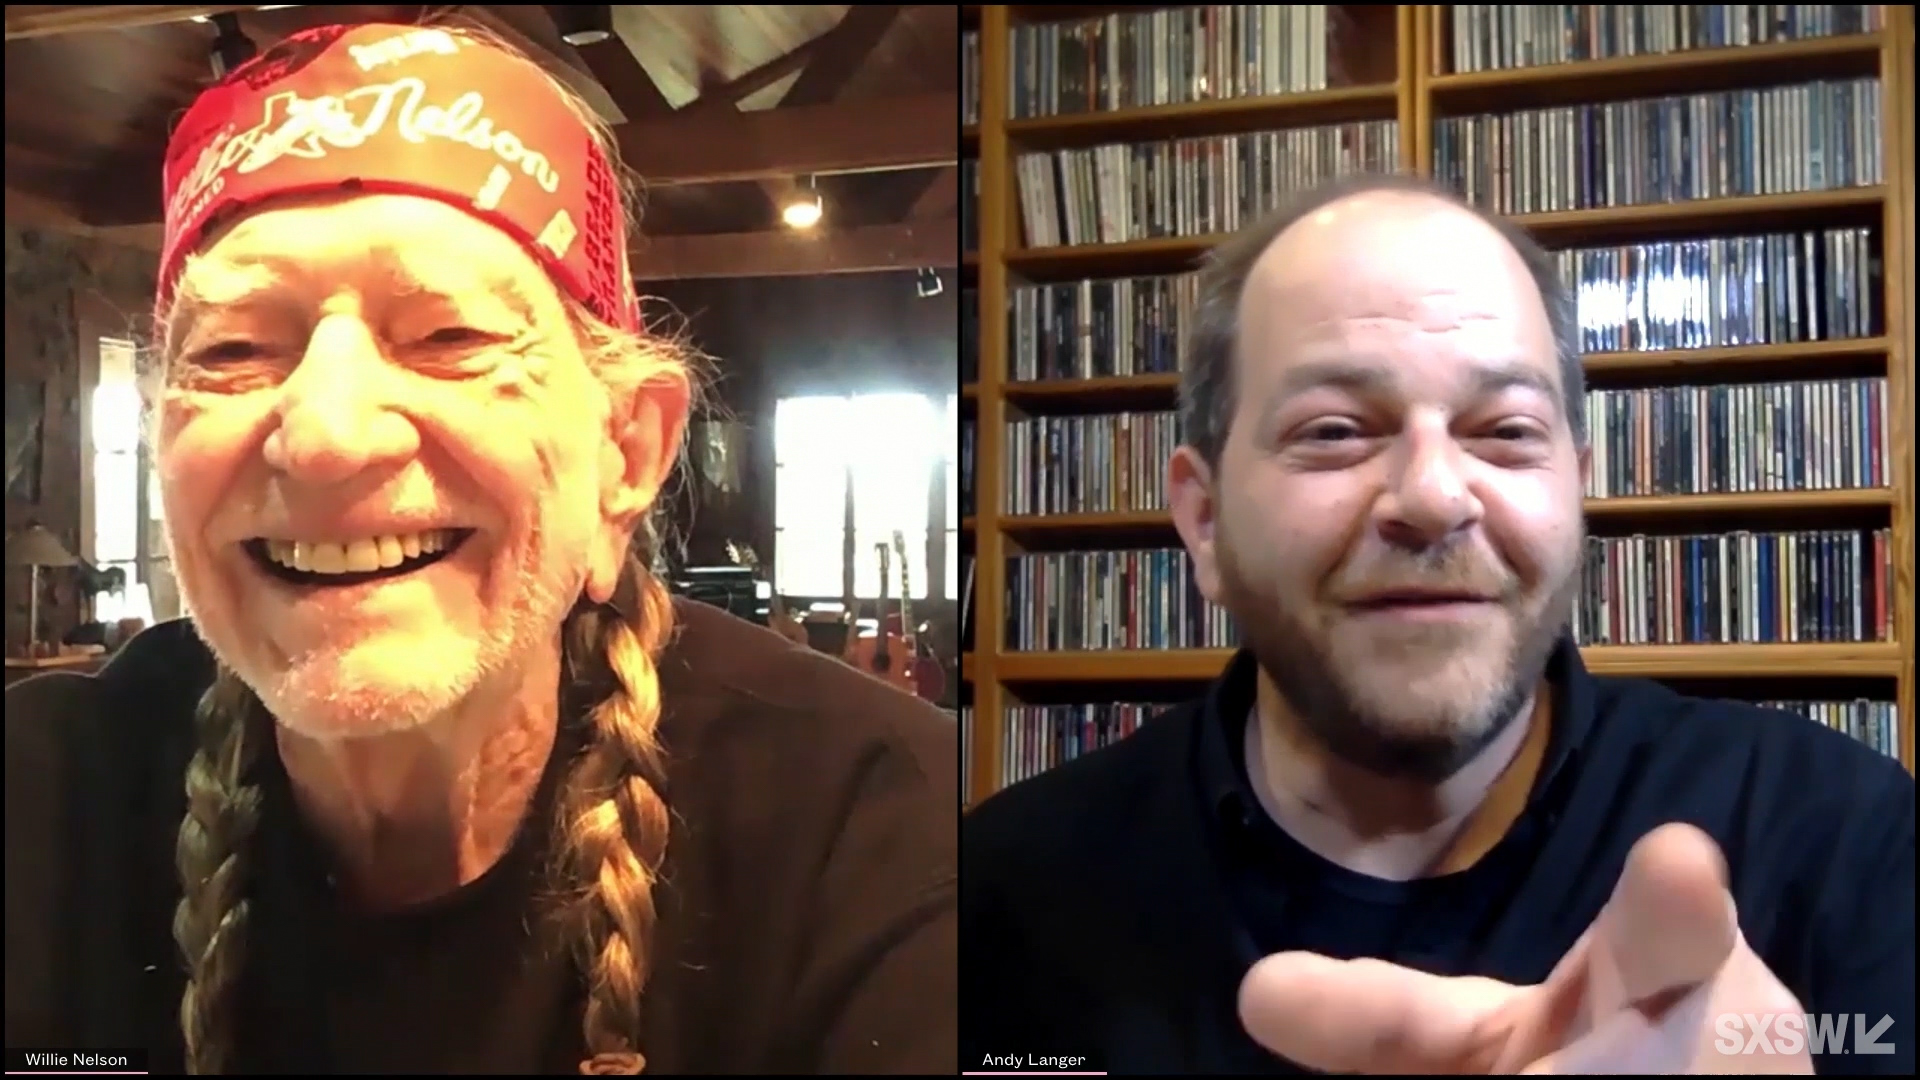 SXSW Keynote Willie Nelson speaks with Andy Langer during SXSW Online on March 17, 2021.